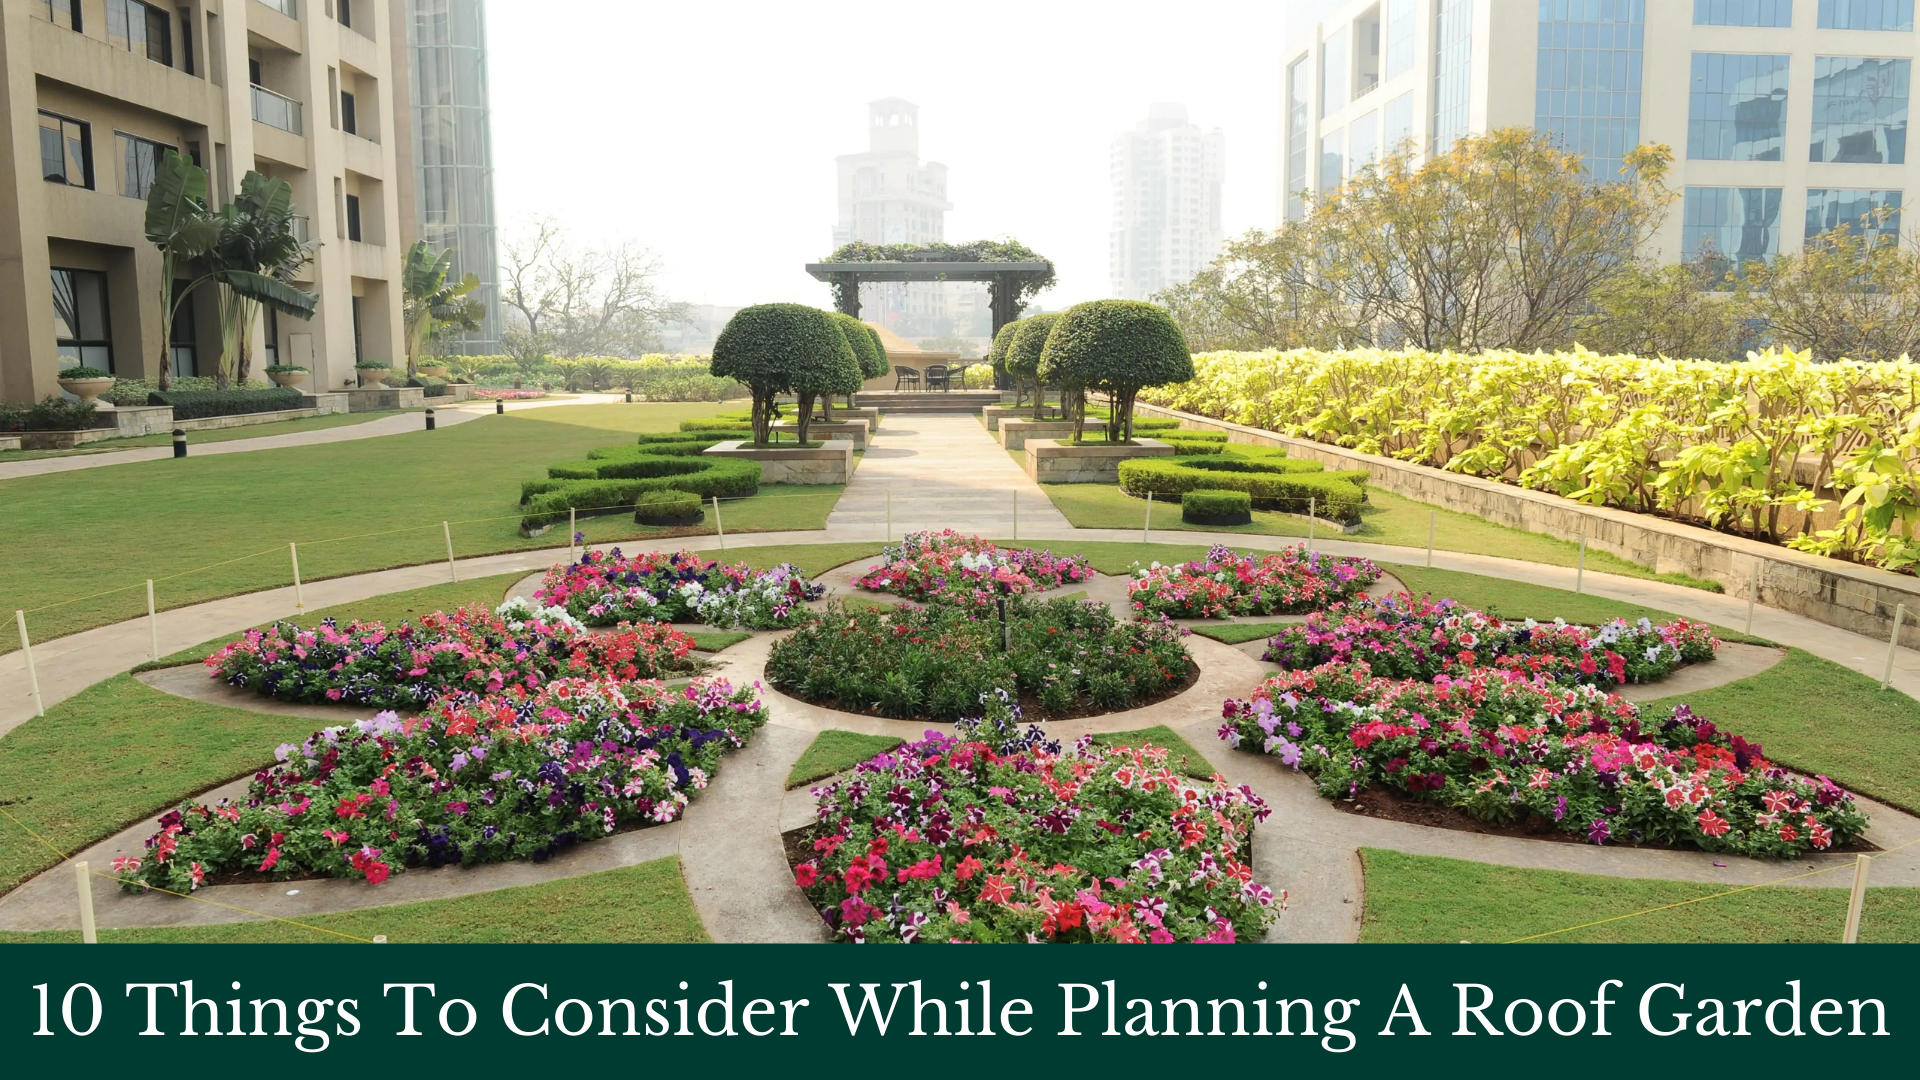 10 Things To Consider While Planning A Roof Garden roof garden